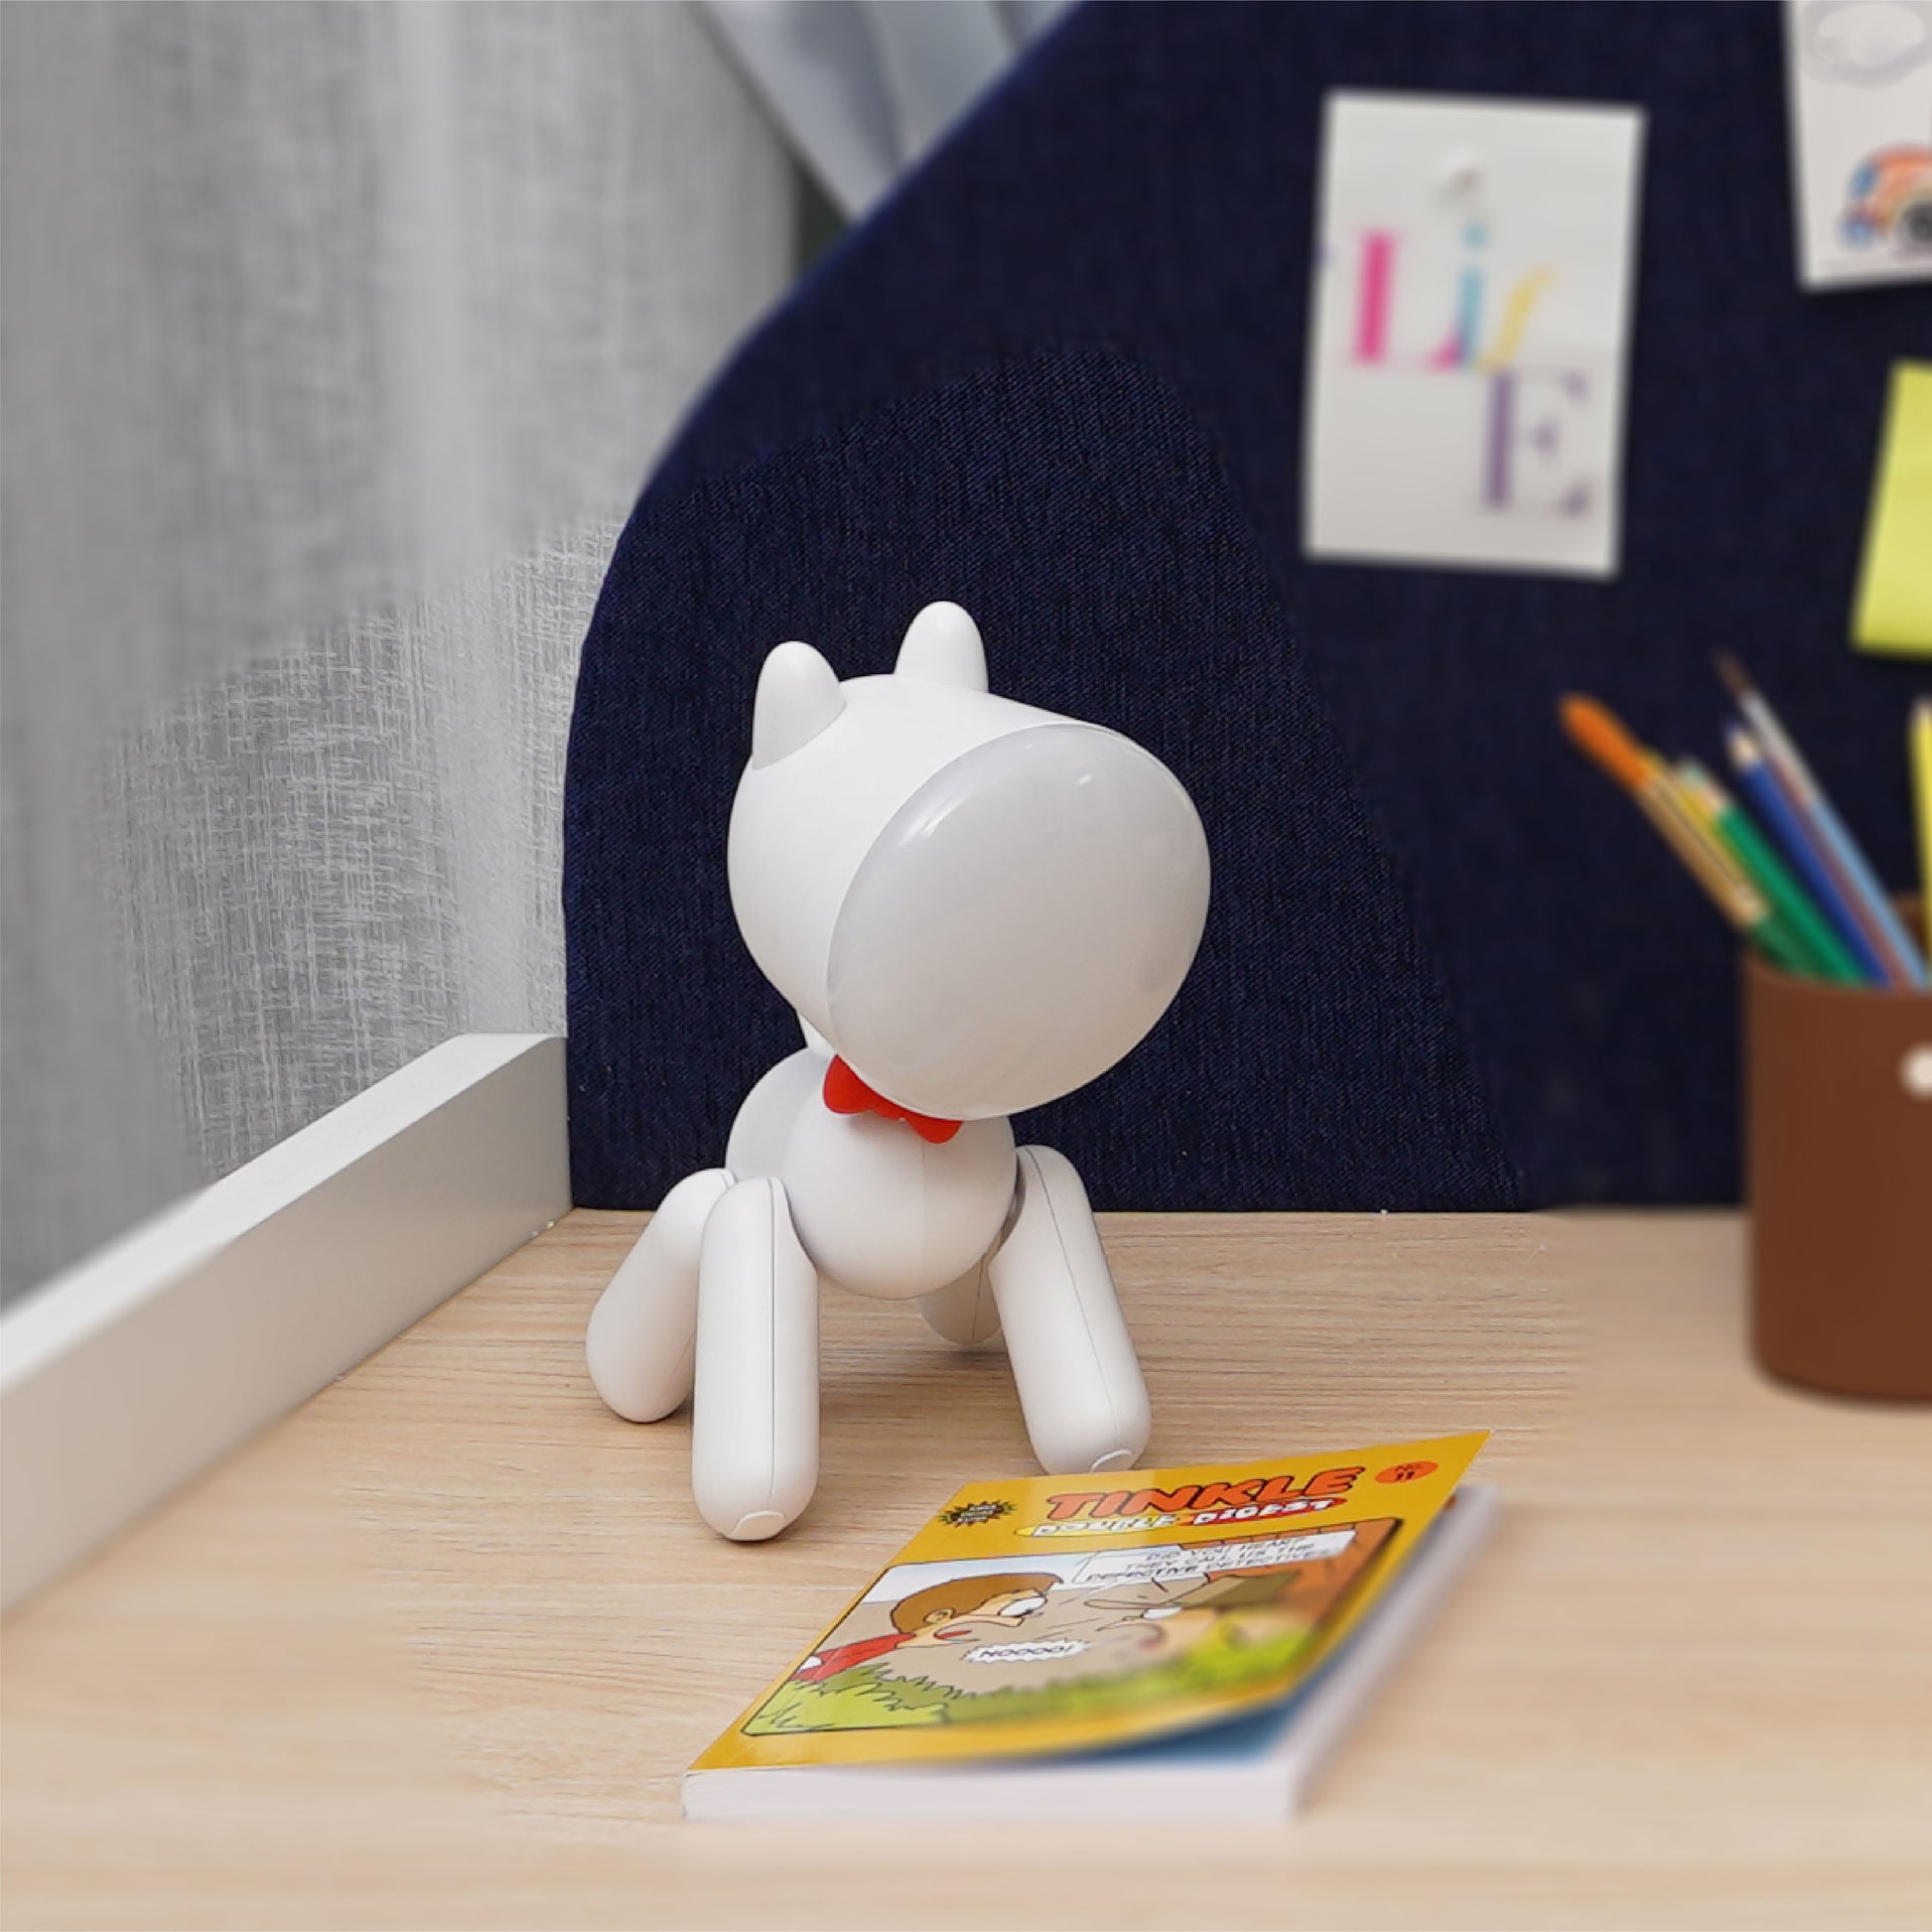 media_gallary Rechargeable Study Table Lamp for kids - woof woof 1